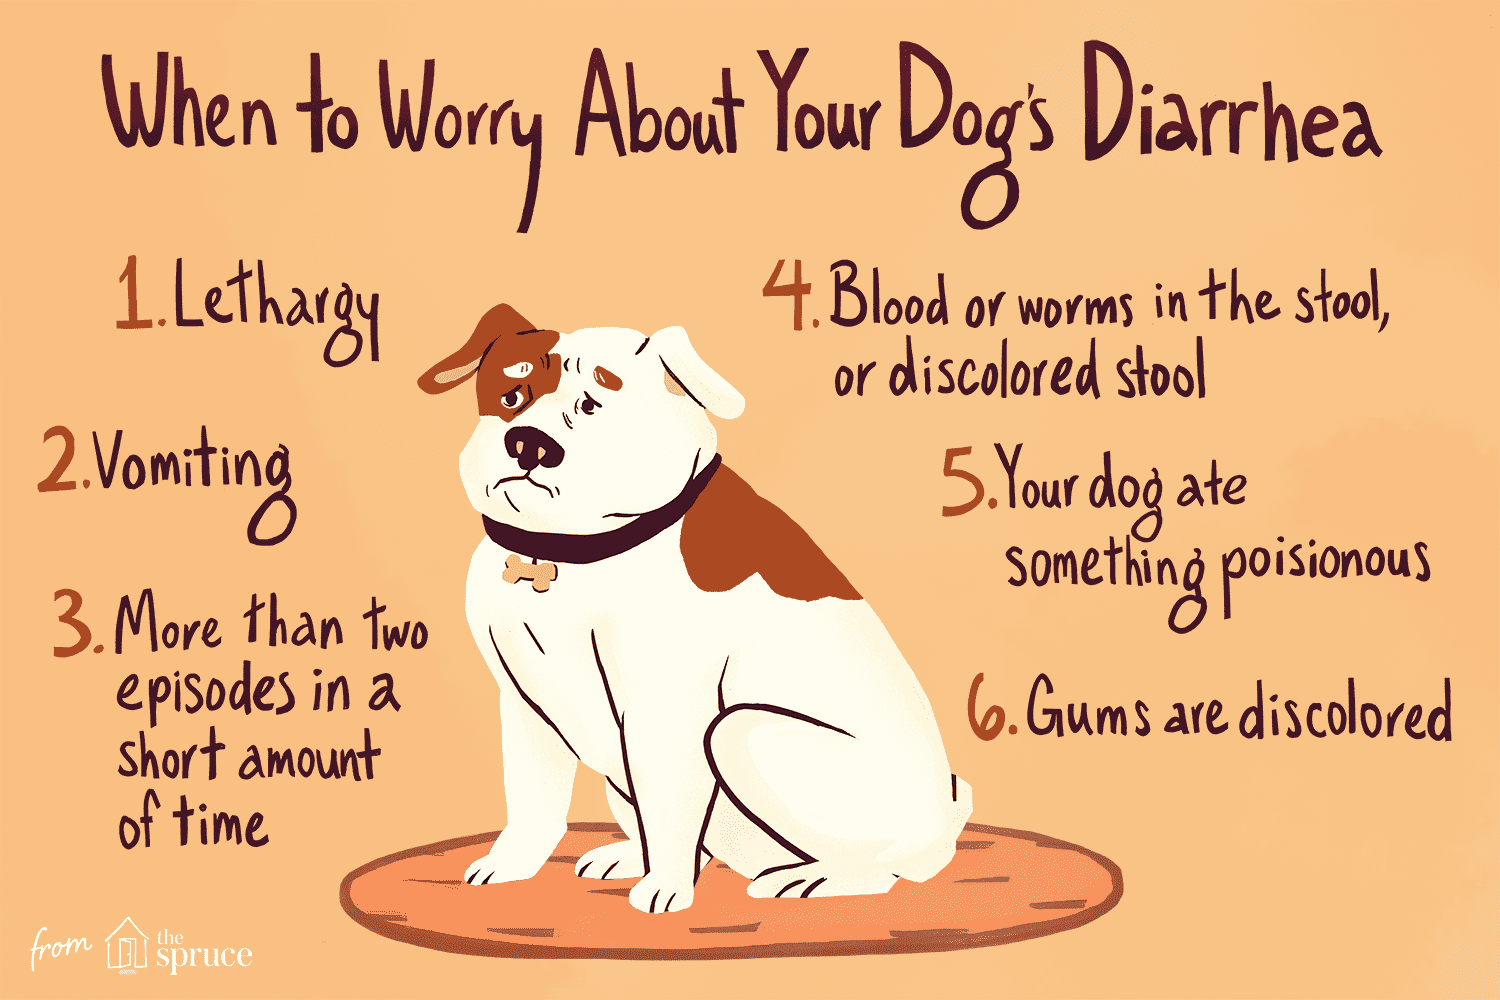 An illustration of a dog and warning signs about when to worry about your dog's diarrhead